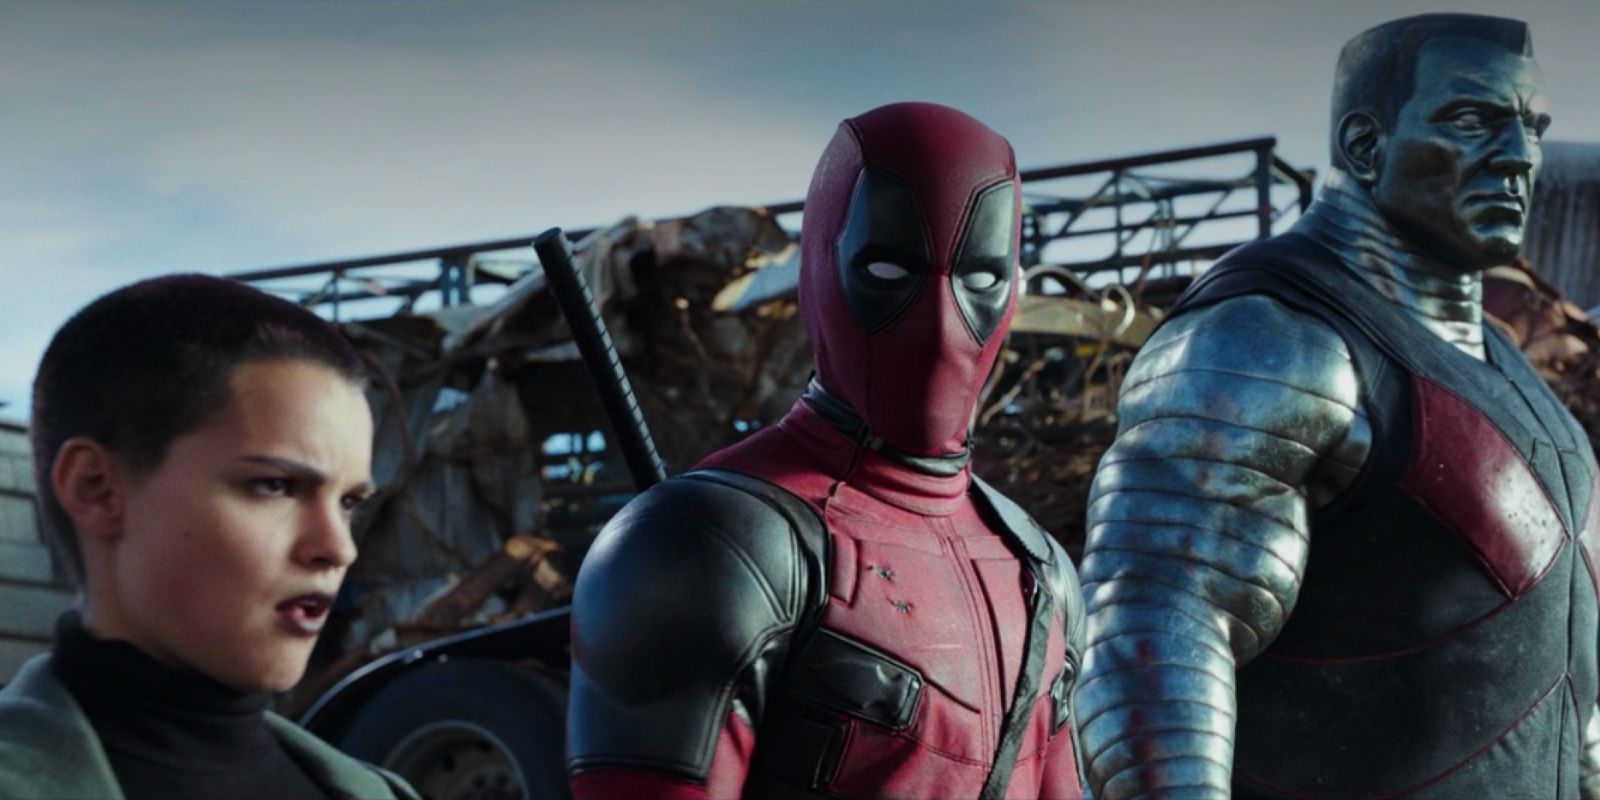 Three characters from Deadpool standing.